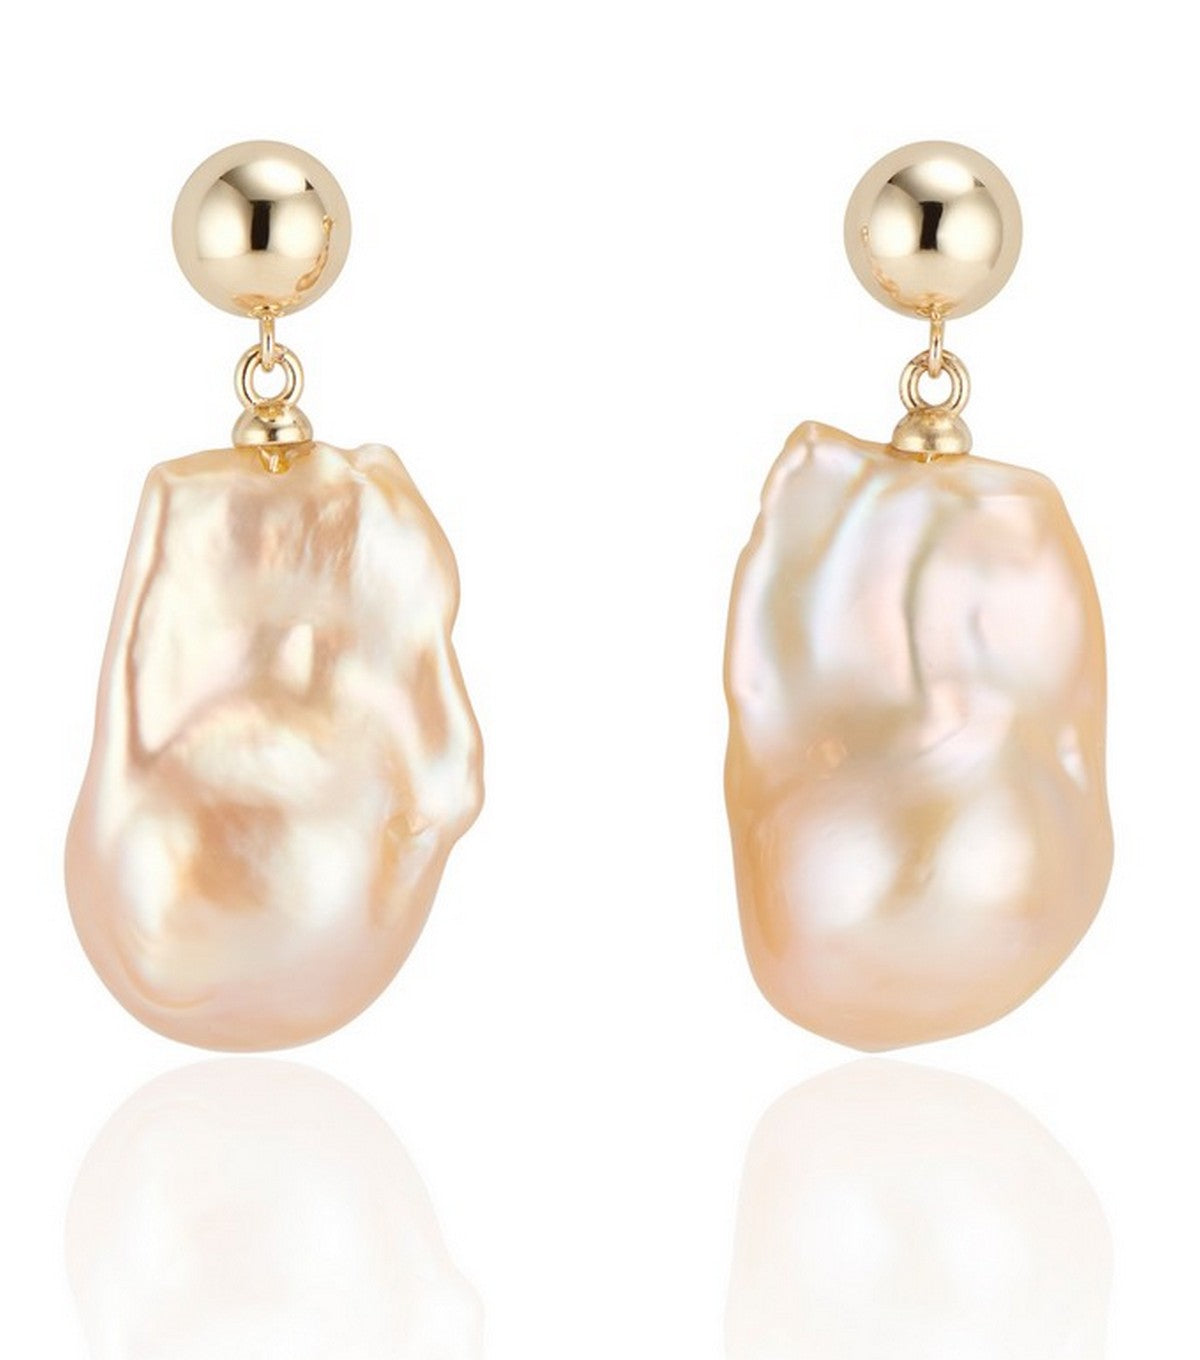 Double Bubble Design features a hollow 7.5mm 14k Yellow Gold Shiny ball with a natural golden hue baroque pearl drop.